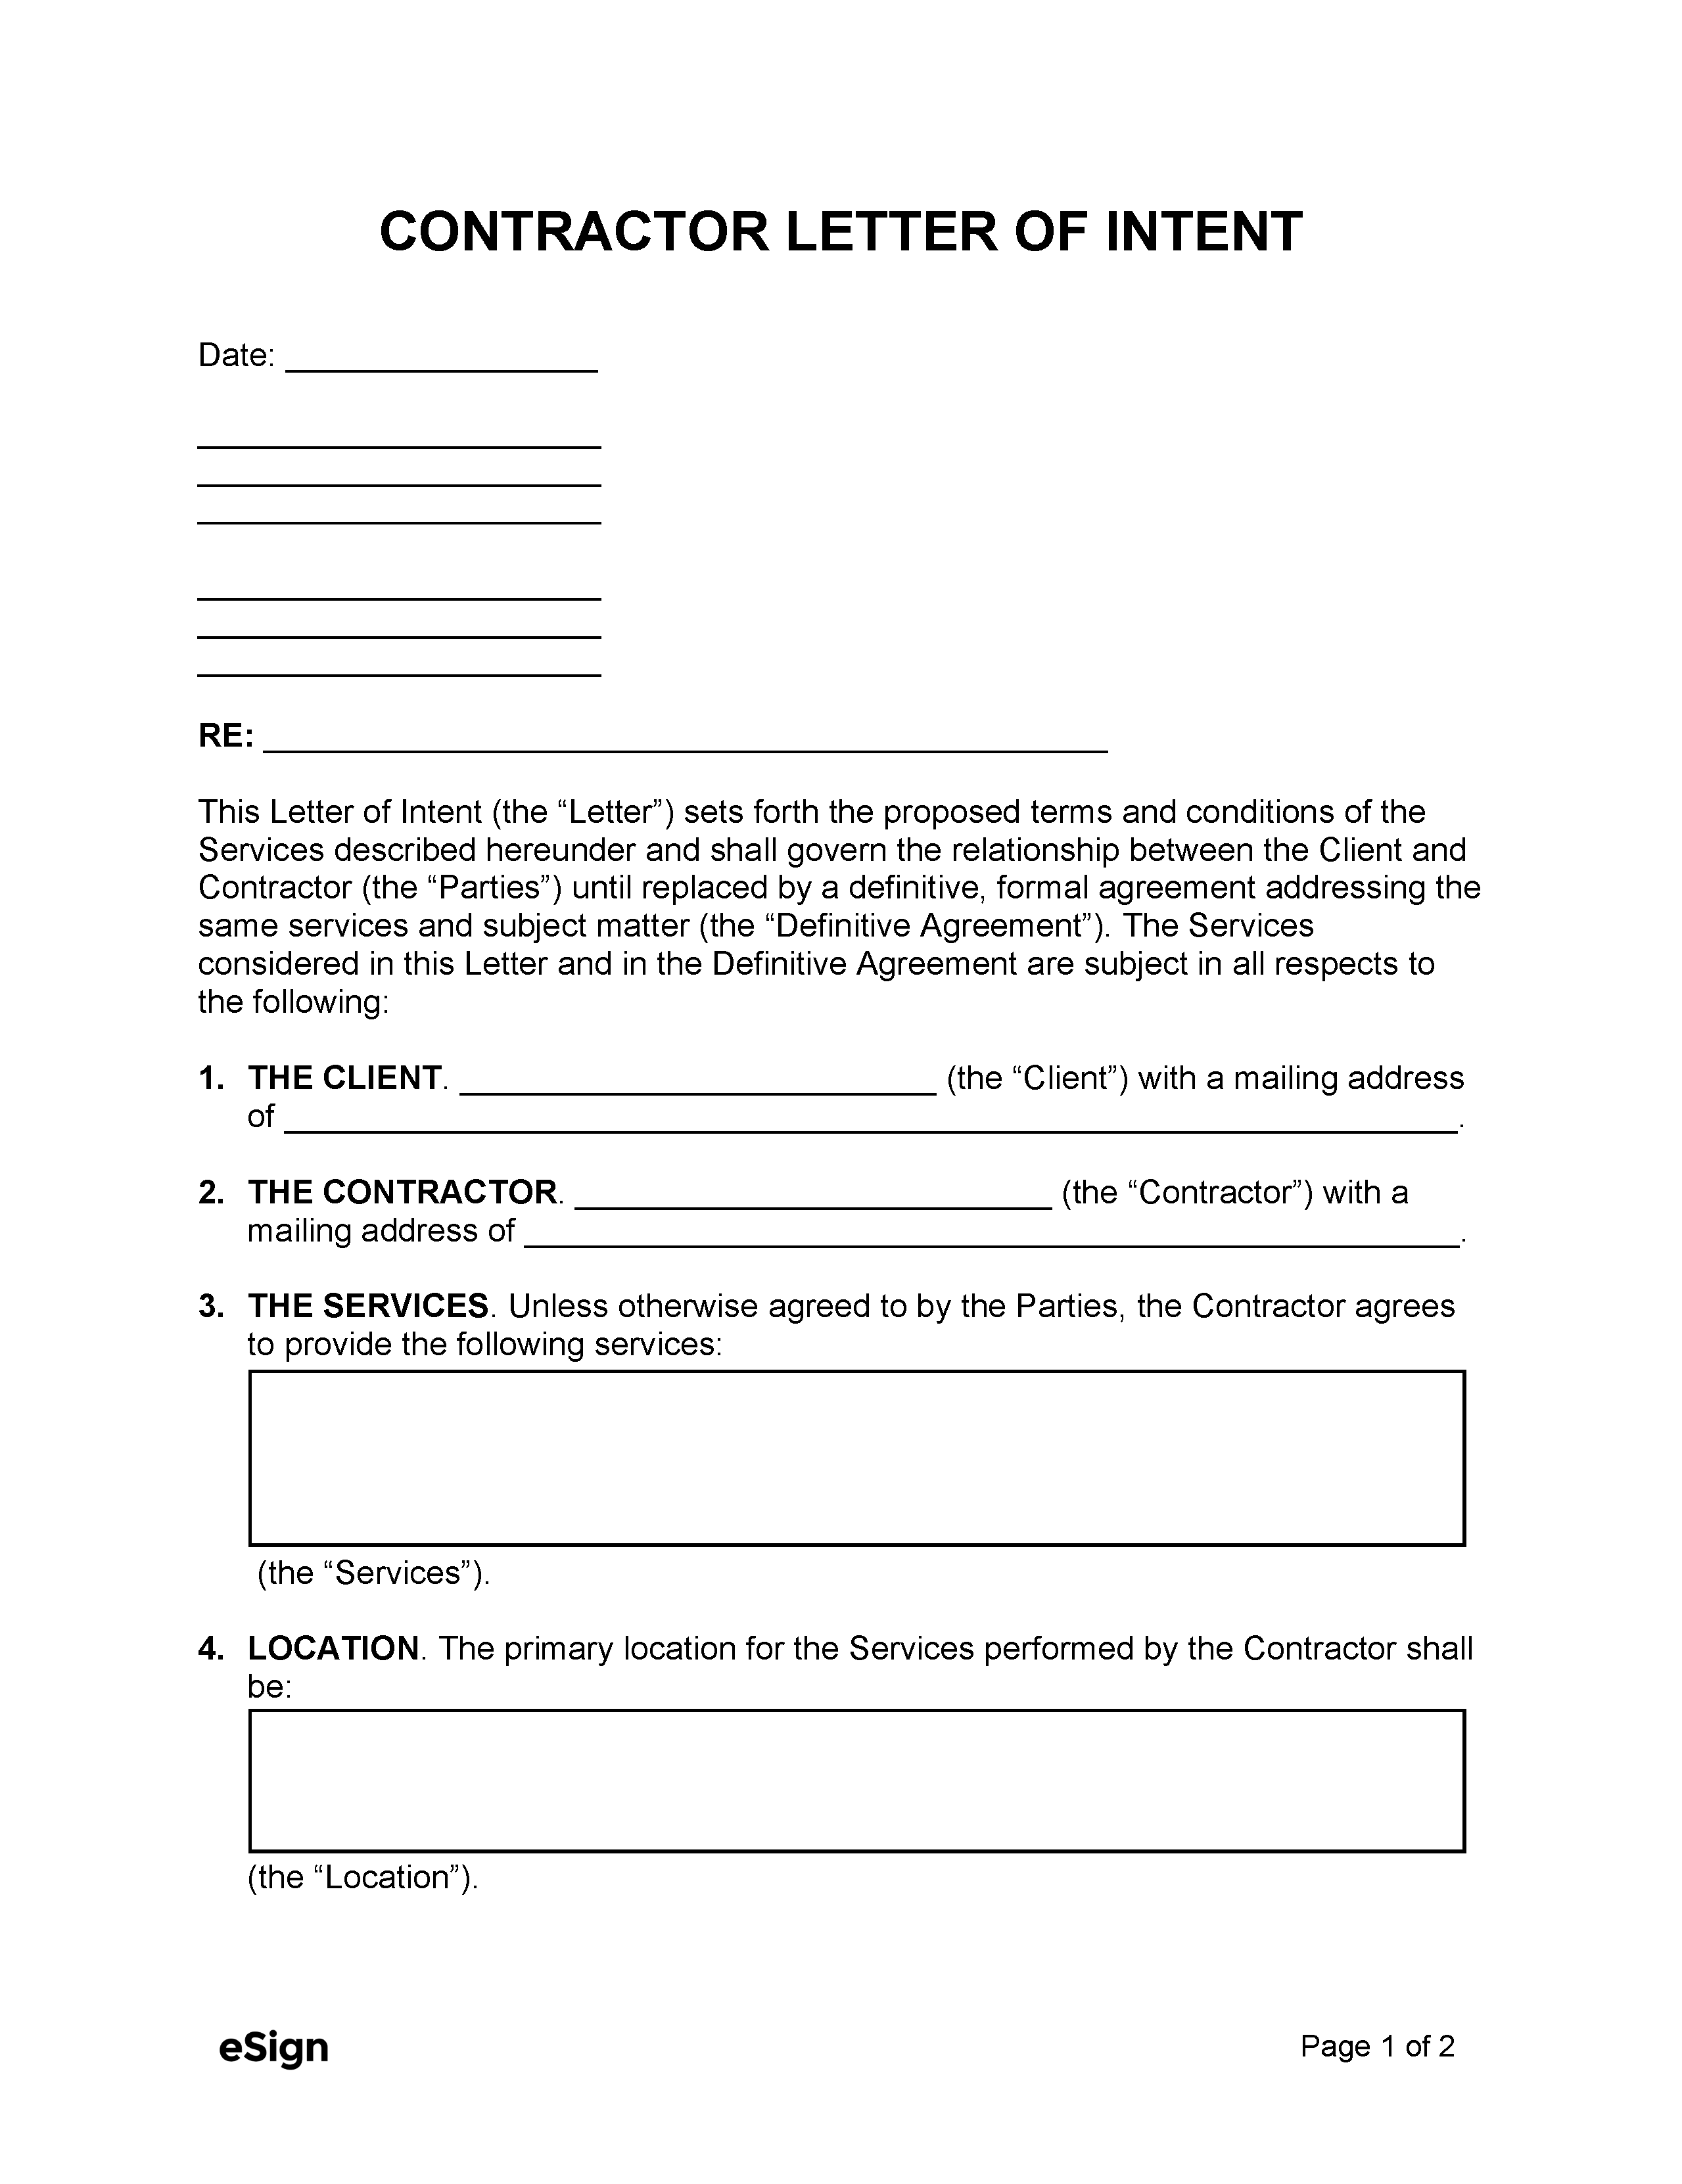 Free Contractor Letter Of Intent Template PDF Word Letter Of Intent